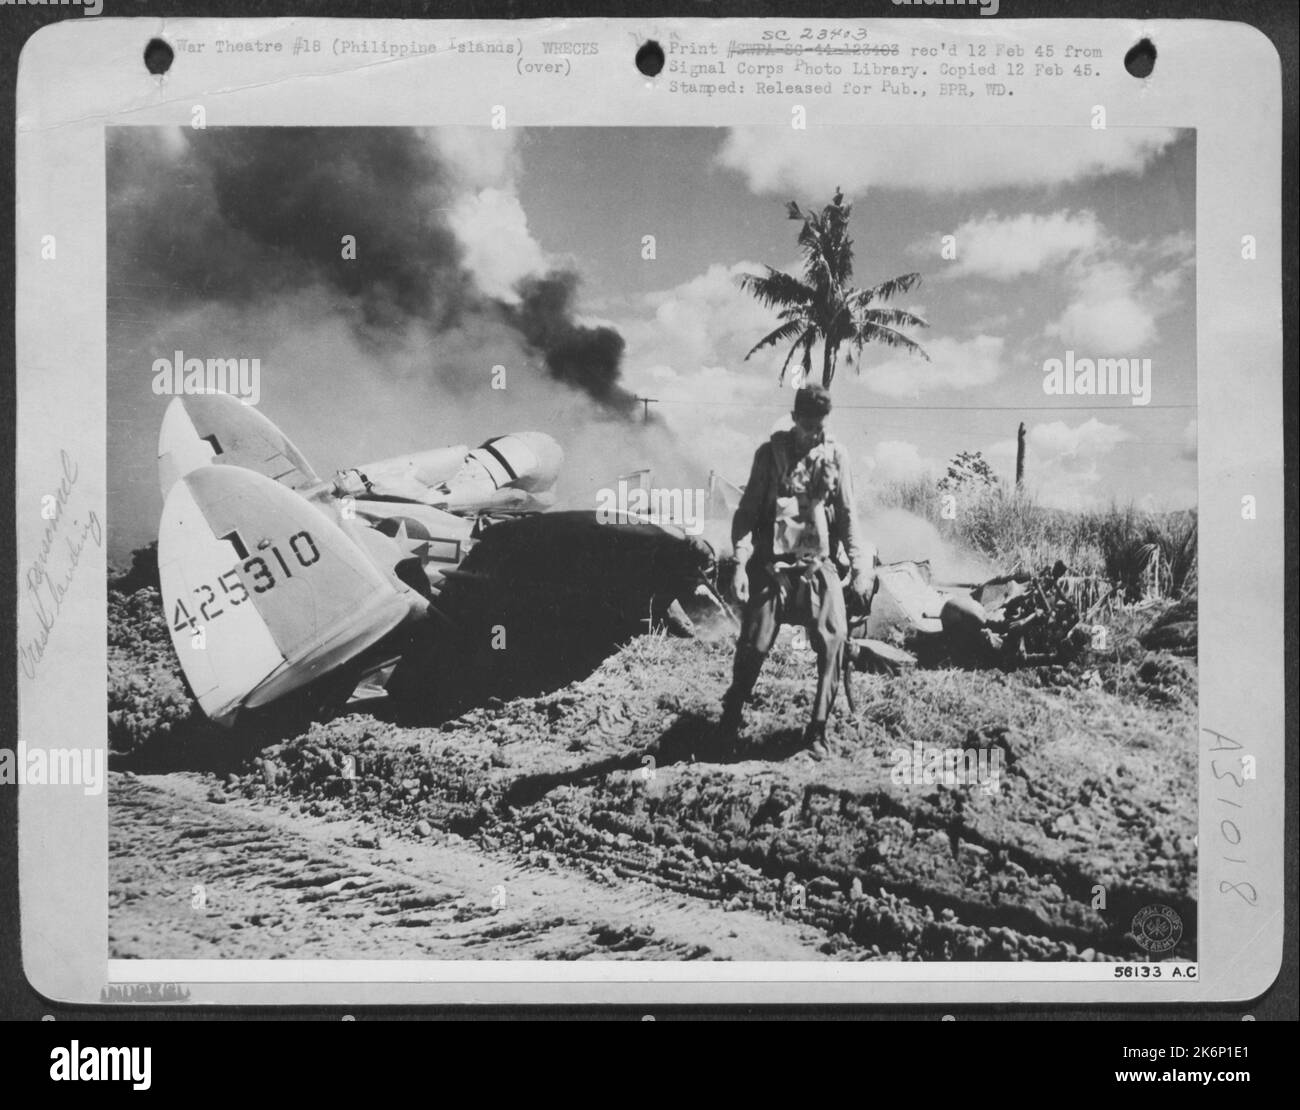 MIRACULOUS ESCAPE--A dramatic picture of Lt. S.F. Ford, fighter-pilot from Baltimore, Maryland, walking from his Lockheed P-38 Lightning unharmed a few seconds after he crash landed. He was shot down in flames by a Jap Zero over Mindoro Island Stock Photo